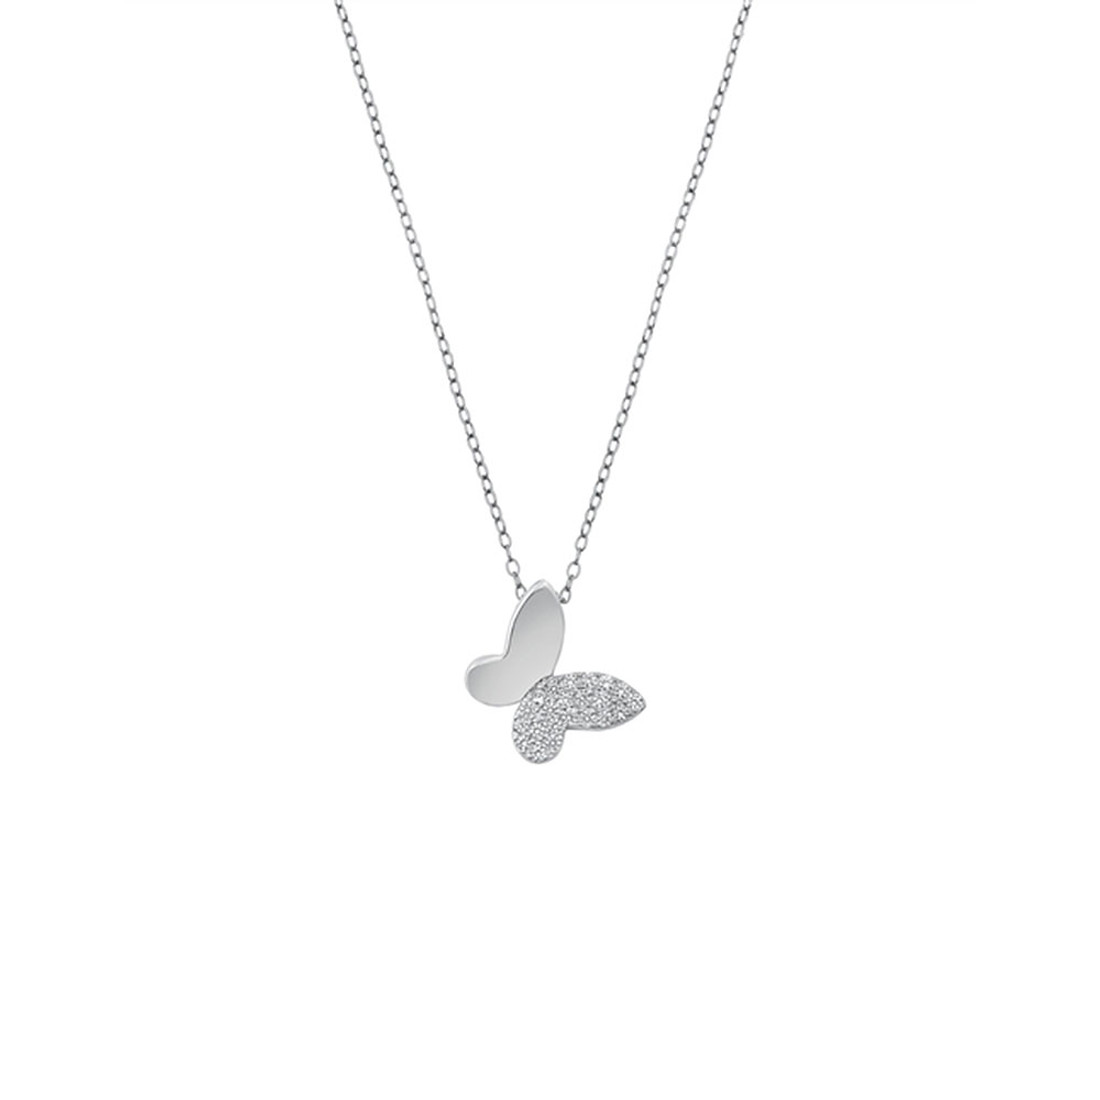 Butterfly sterling silver necklace. 